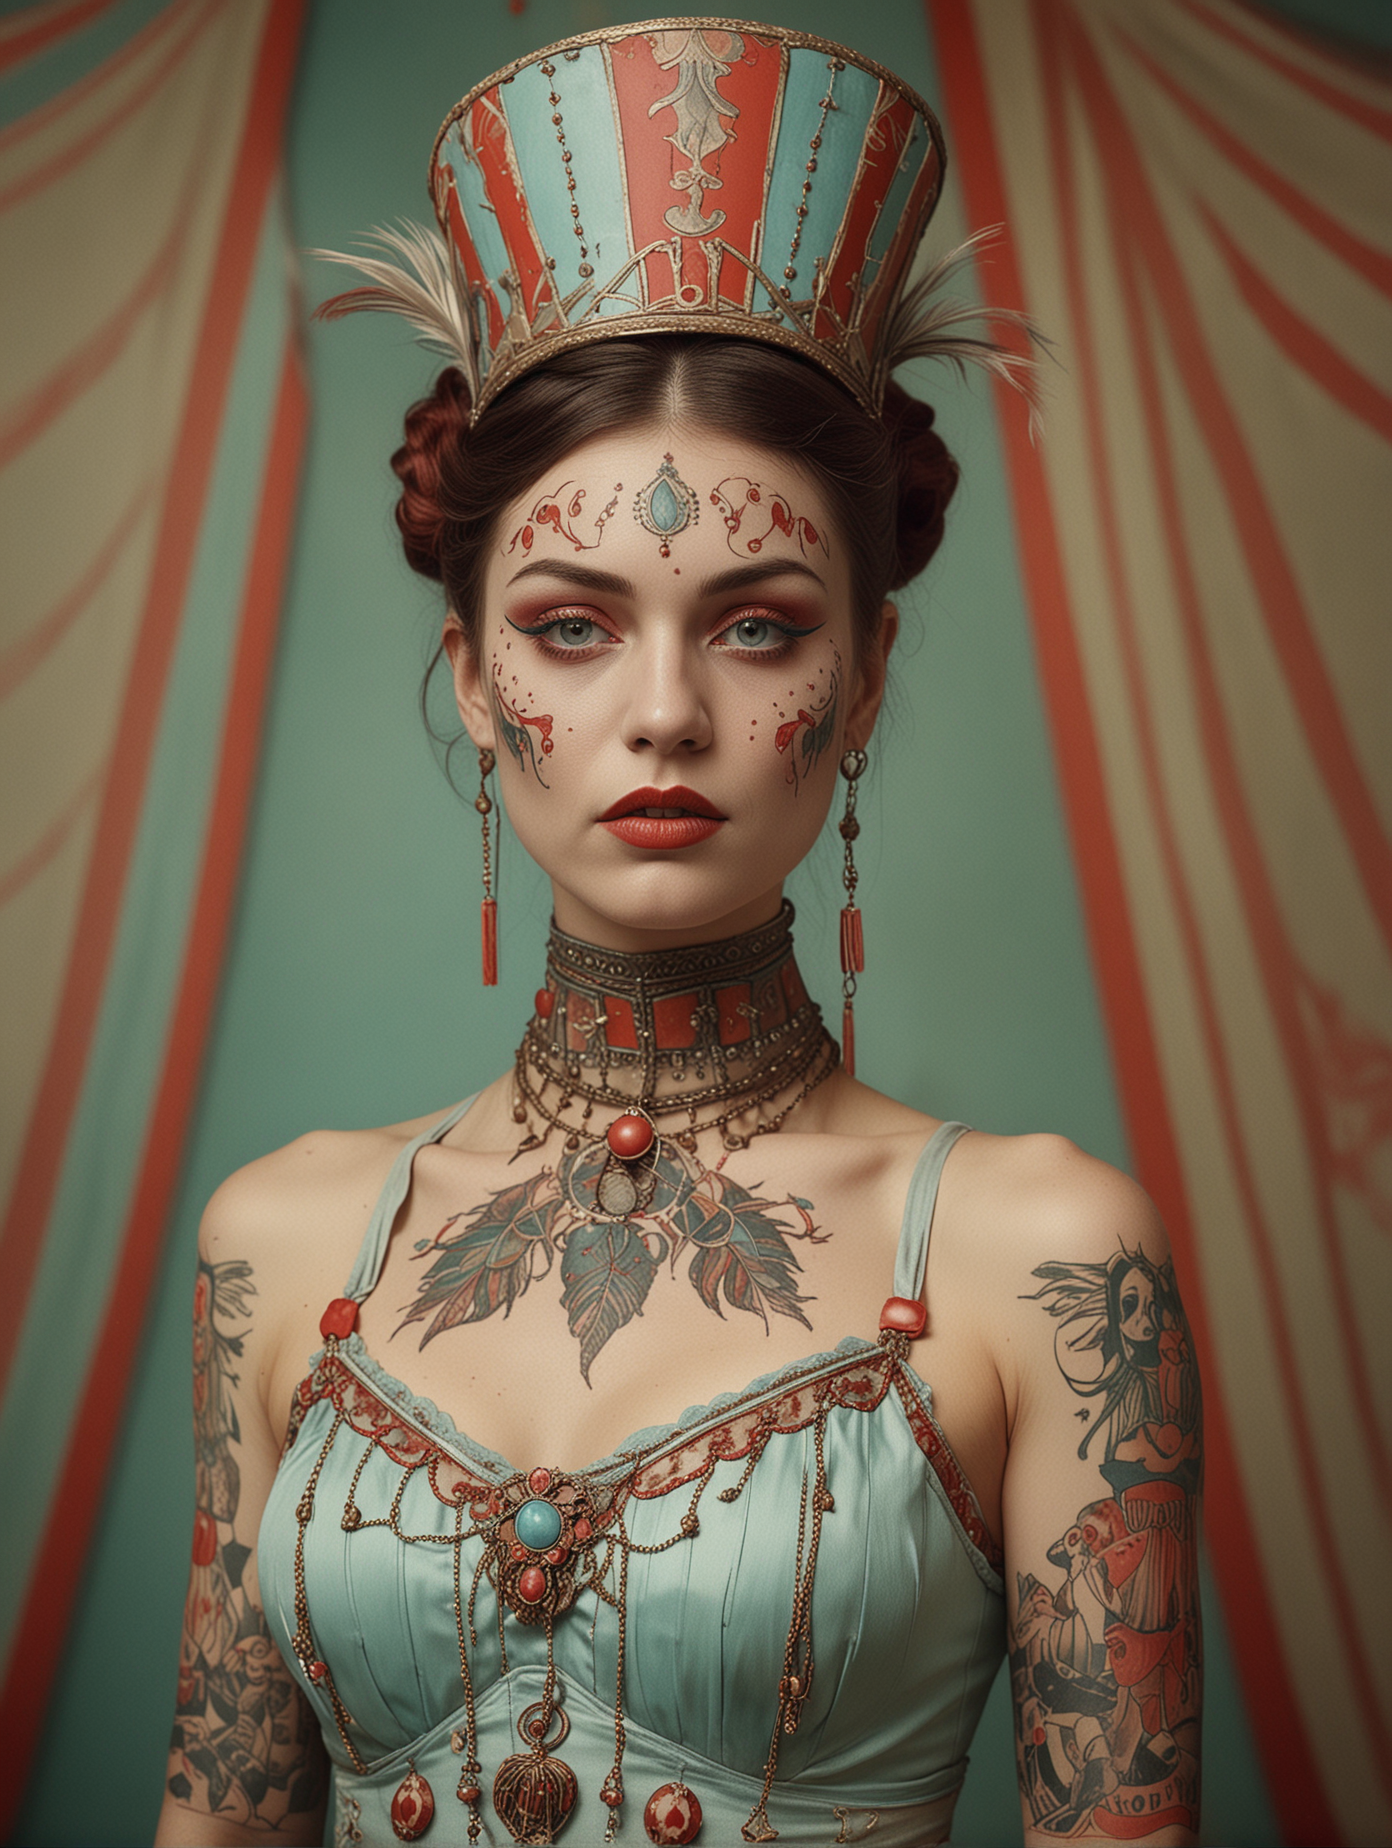 antique circus, in the style of whimsical yet eerie symbolism, Victorian 1920's circus, light cyan and red palette, portraiture, female acrobat, covered in tribal tatoos, nature-inspired pieces, circus costumes, ultra details